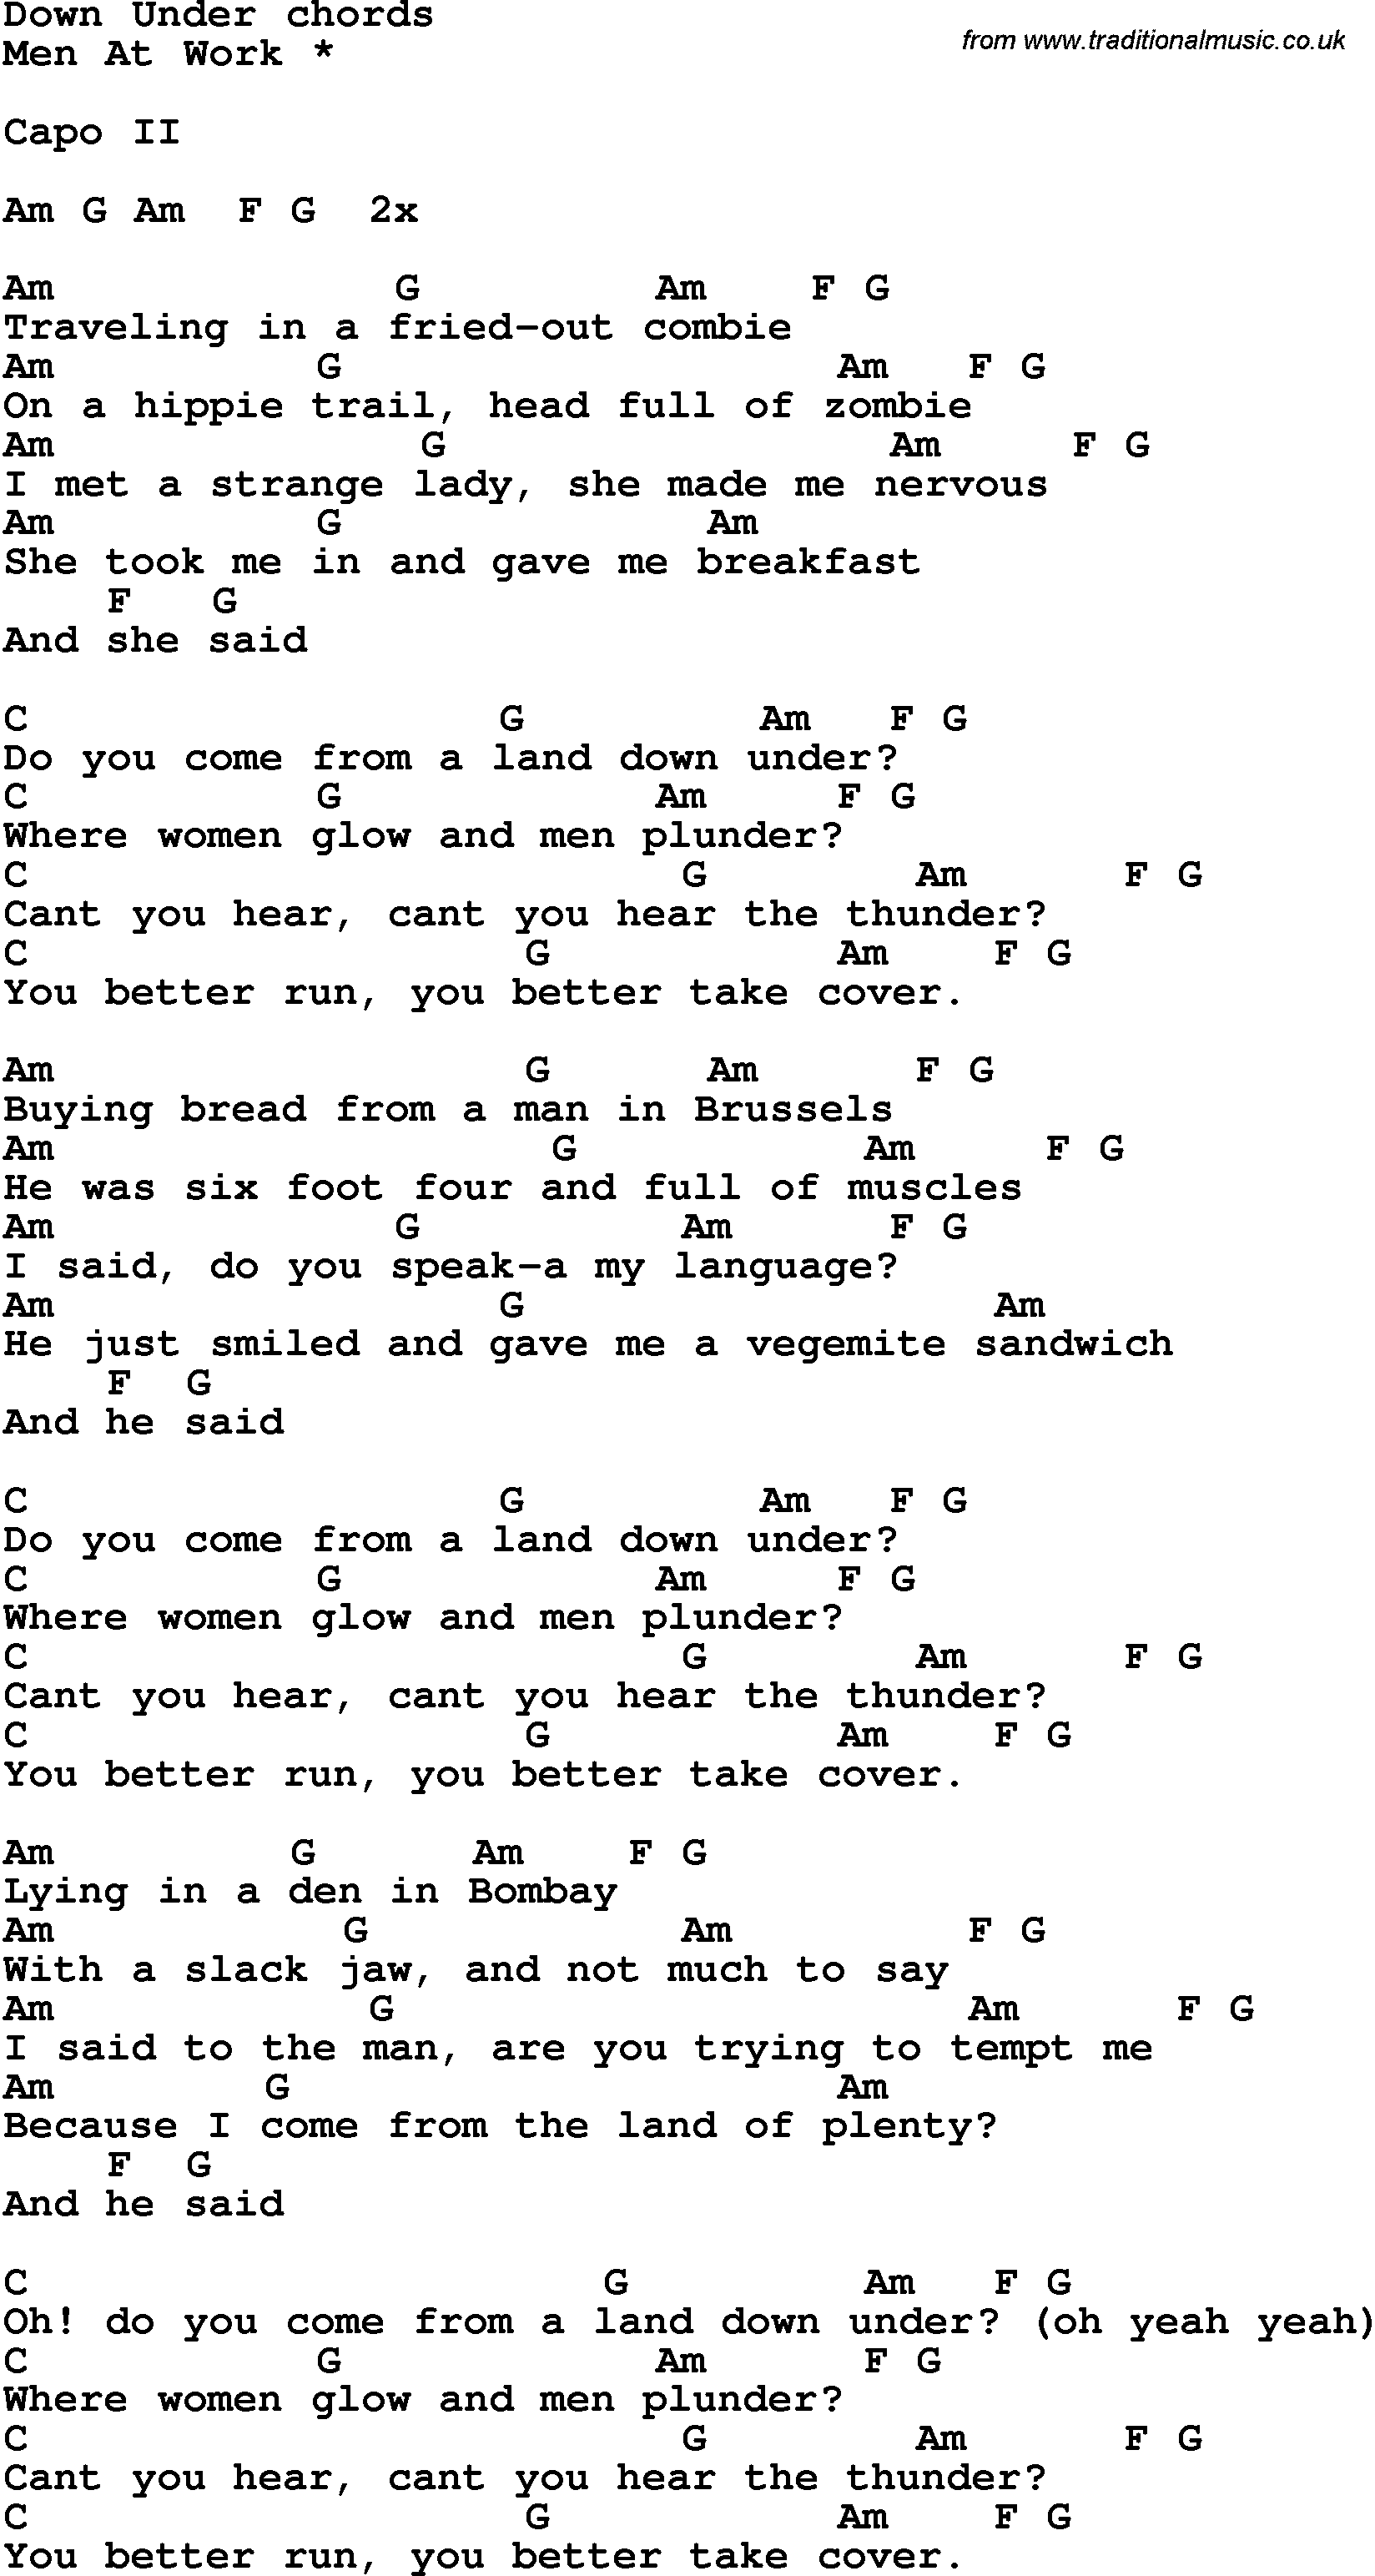 Song Lyrics with guitar chords for Down Under